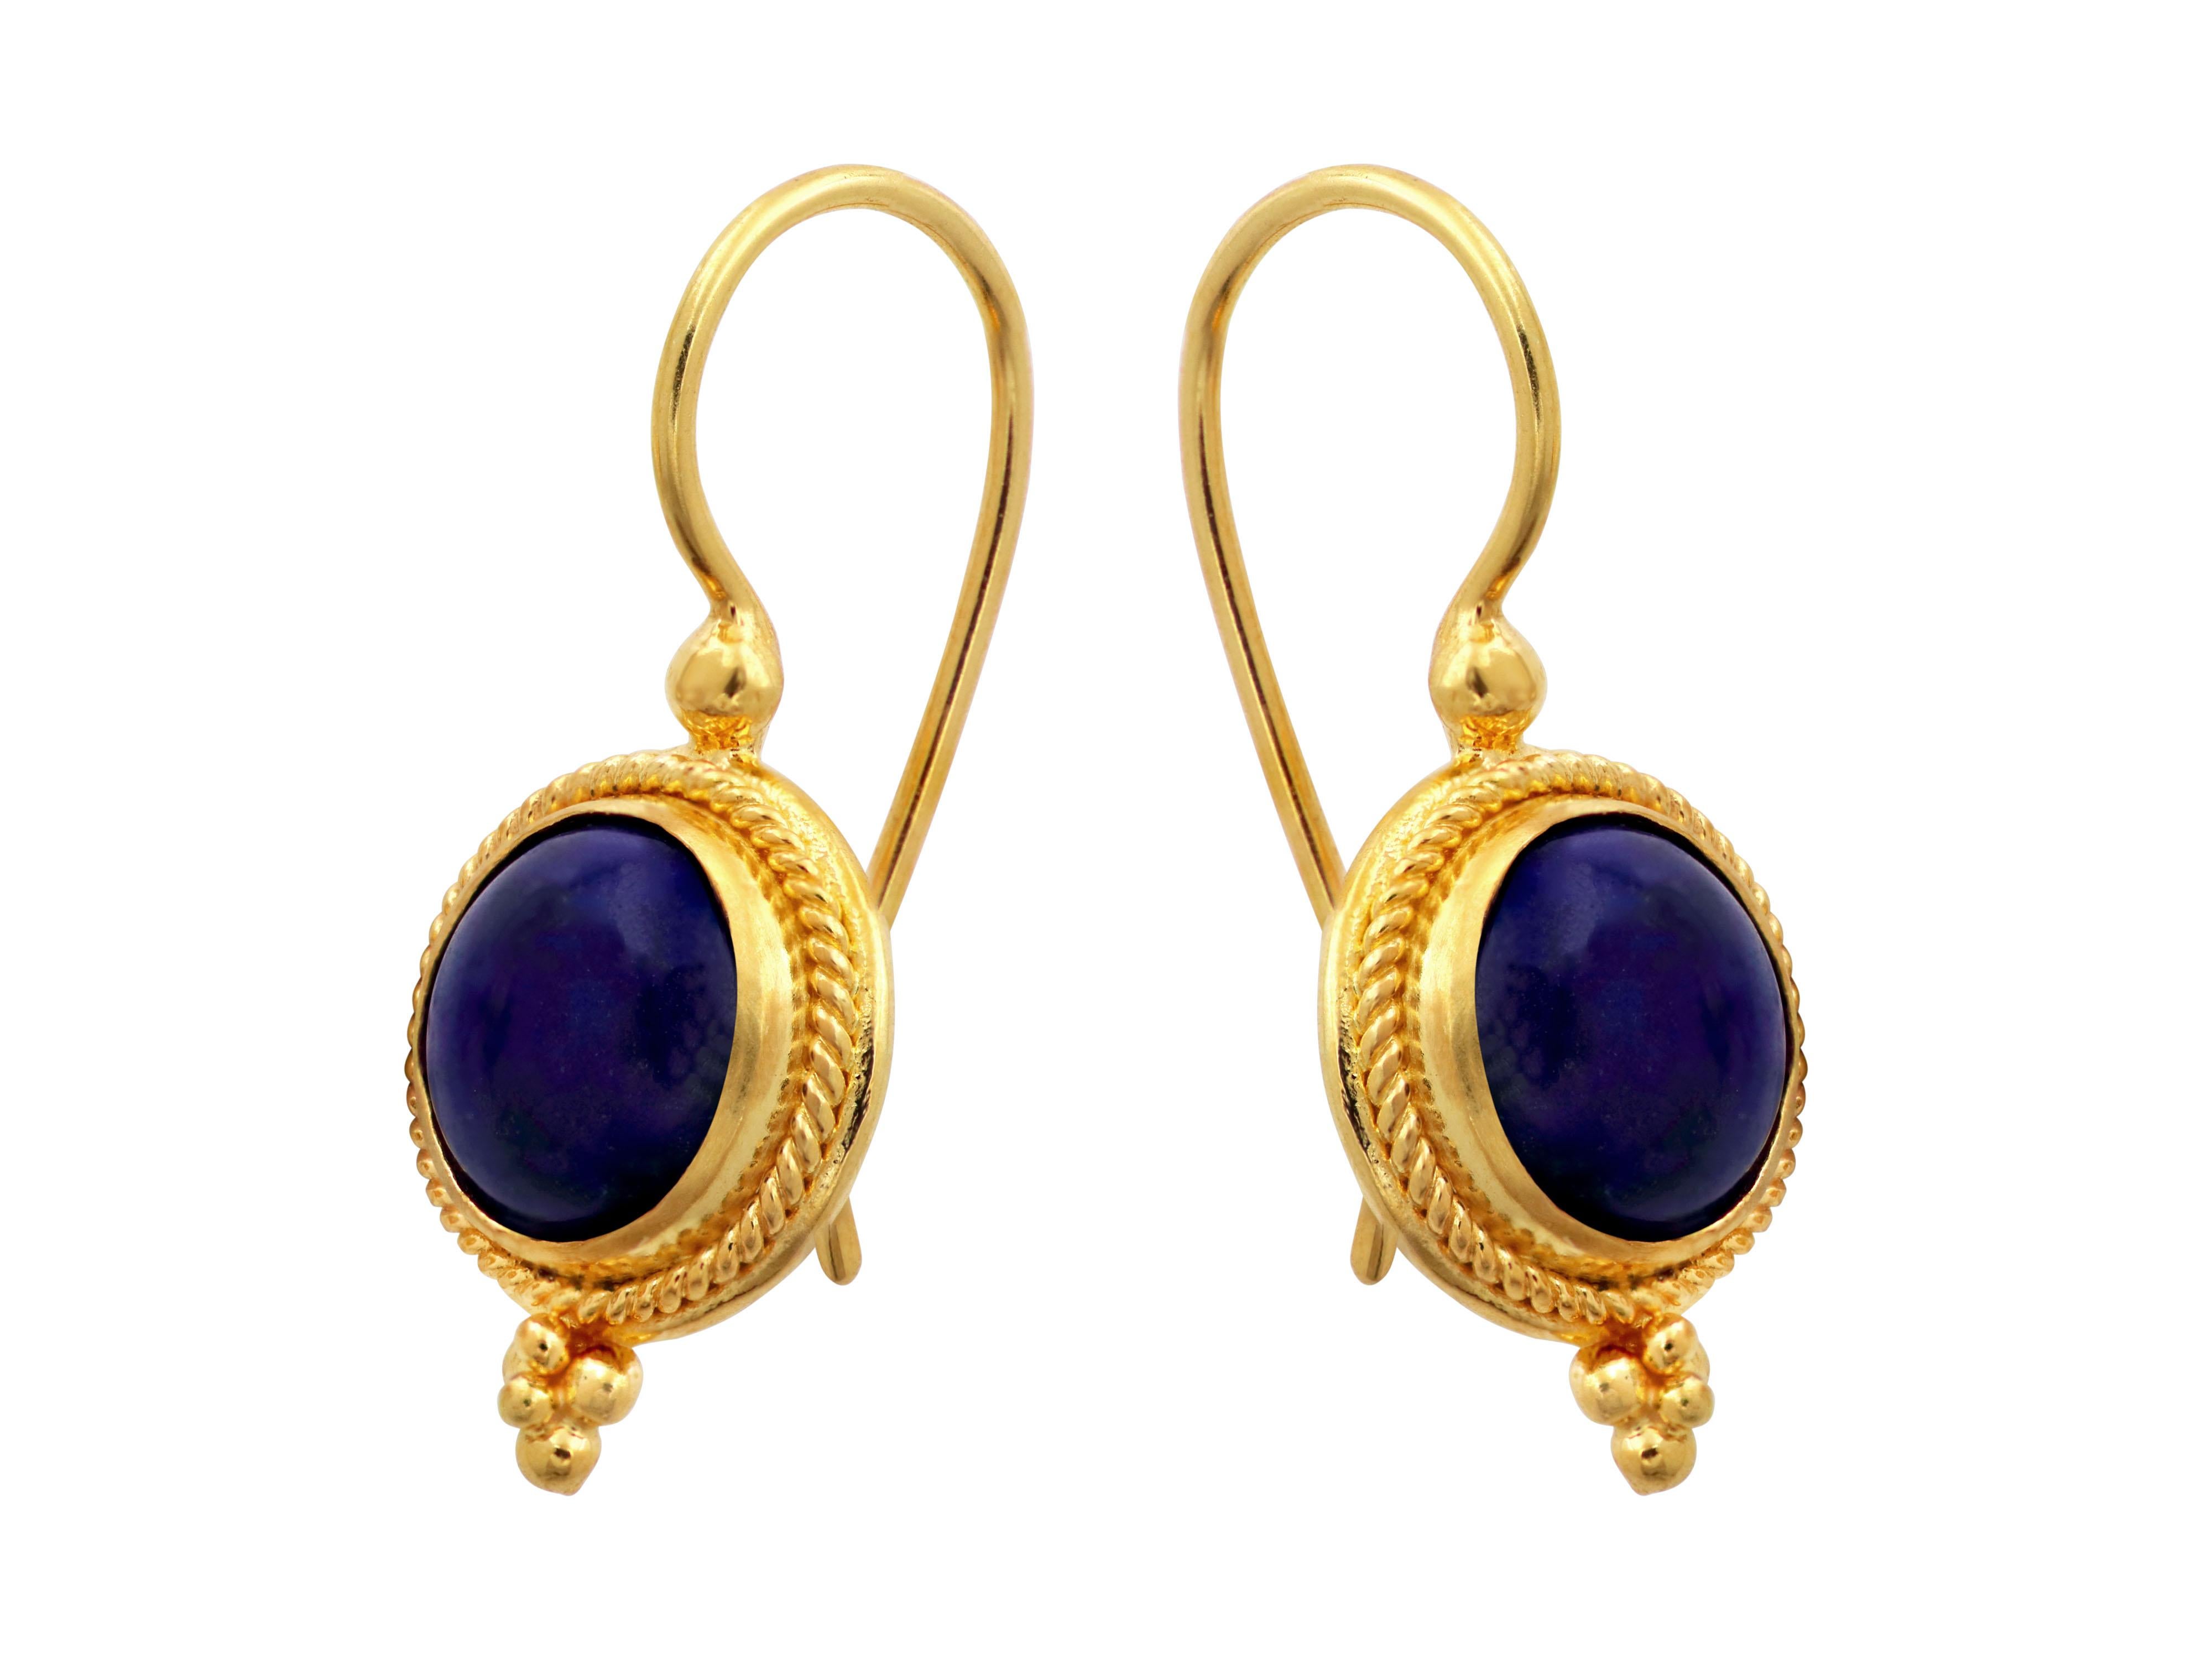 Stunning and luxurious earrings, crafted from 18k gold featuring intricate filigree and granulation decoration. The focal point of the design is the beautiful Lapis Lazuli gemstones, which add a pop of rich blue color to the earrings. The